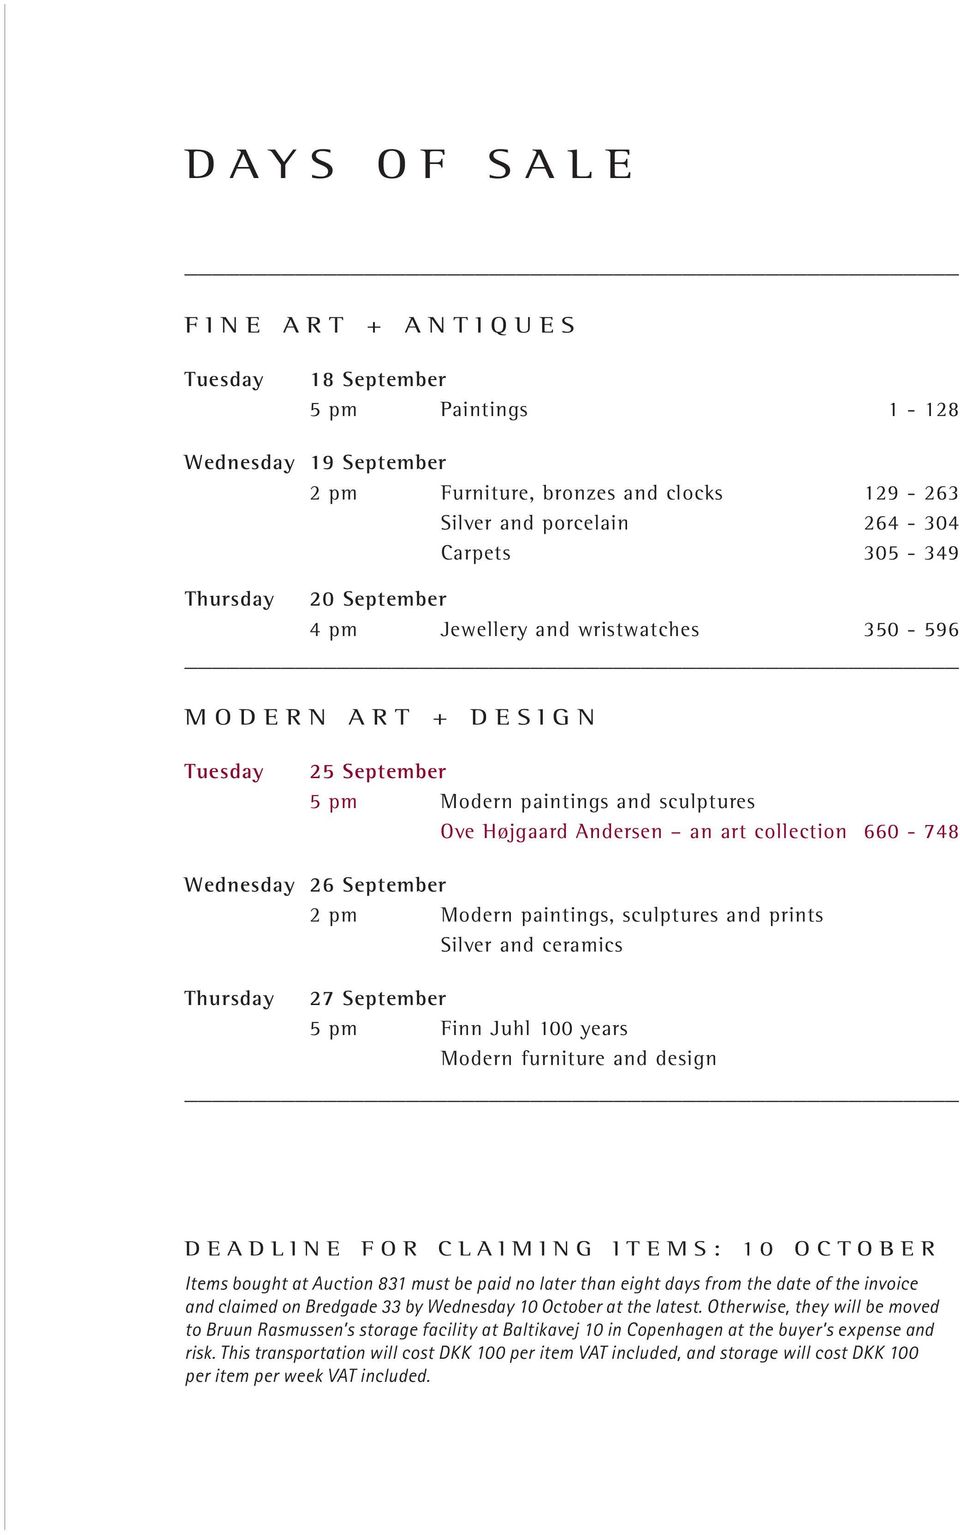 September 2 pm Modern paintings, sculptures and prints Silver and ceramics Thursday 27 September 5 pm Finn juhl 100 years Modern furniture and design D ead line F or C laim ing it e MS: 10 octo B er